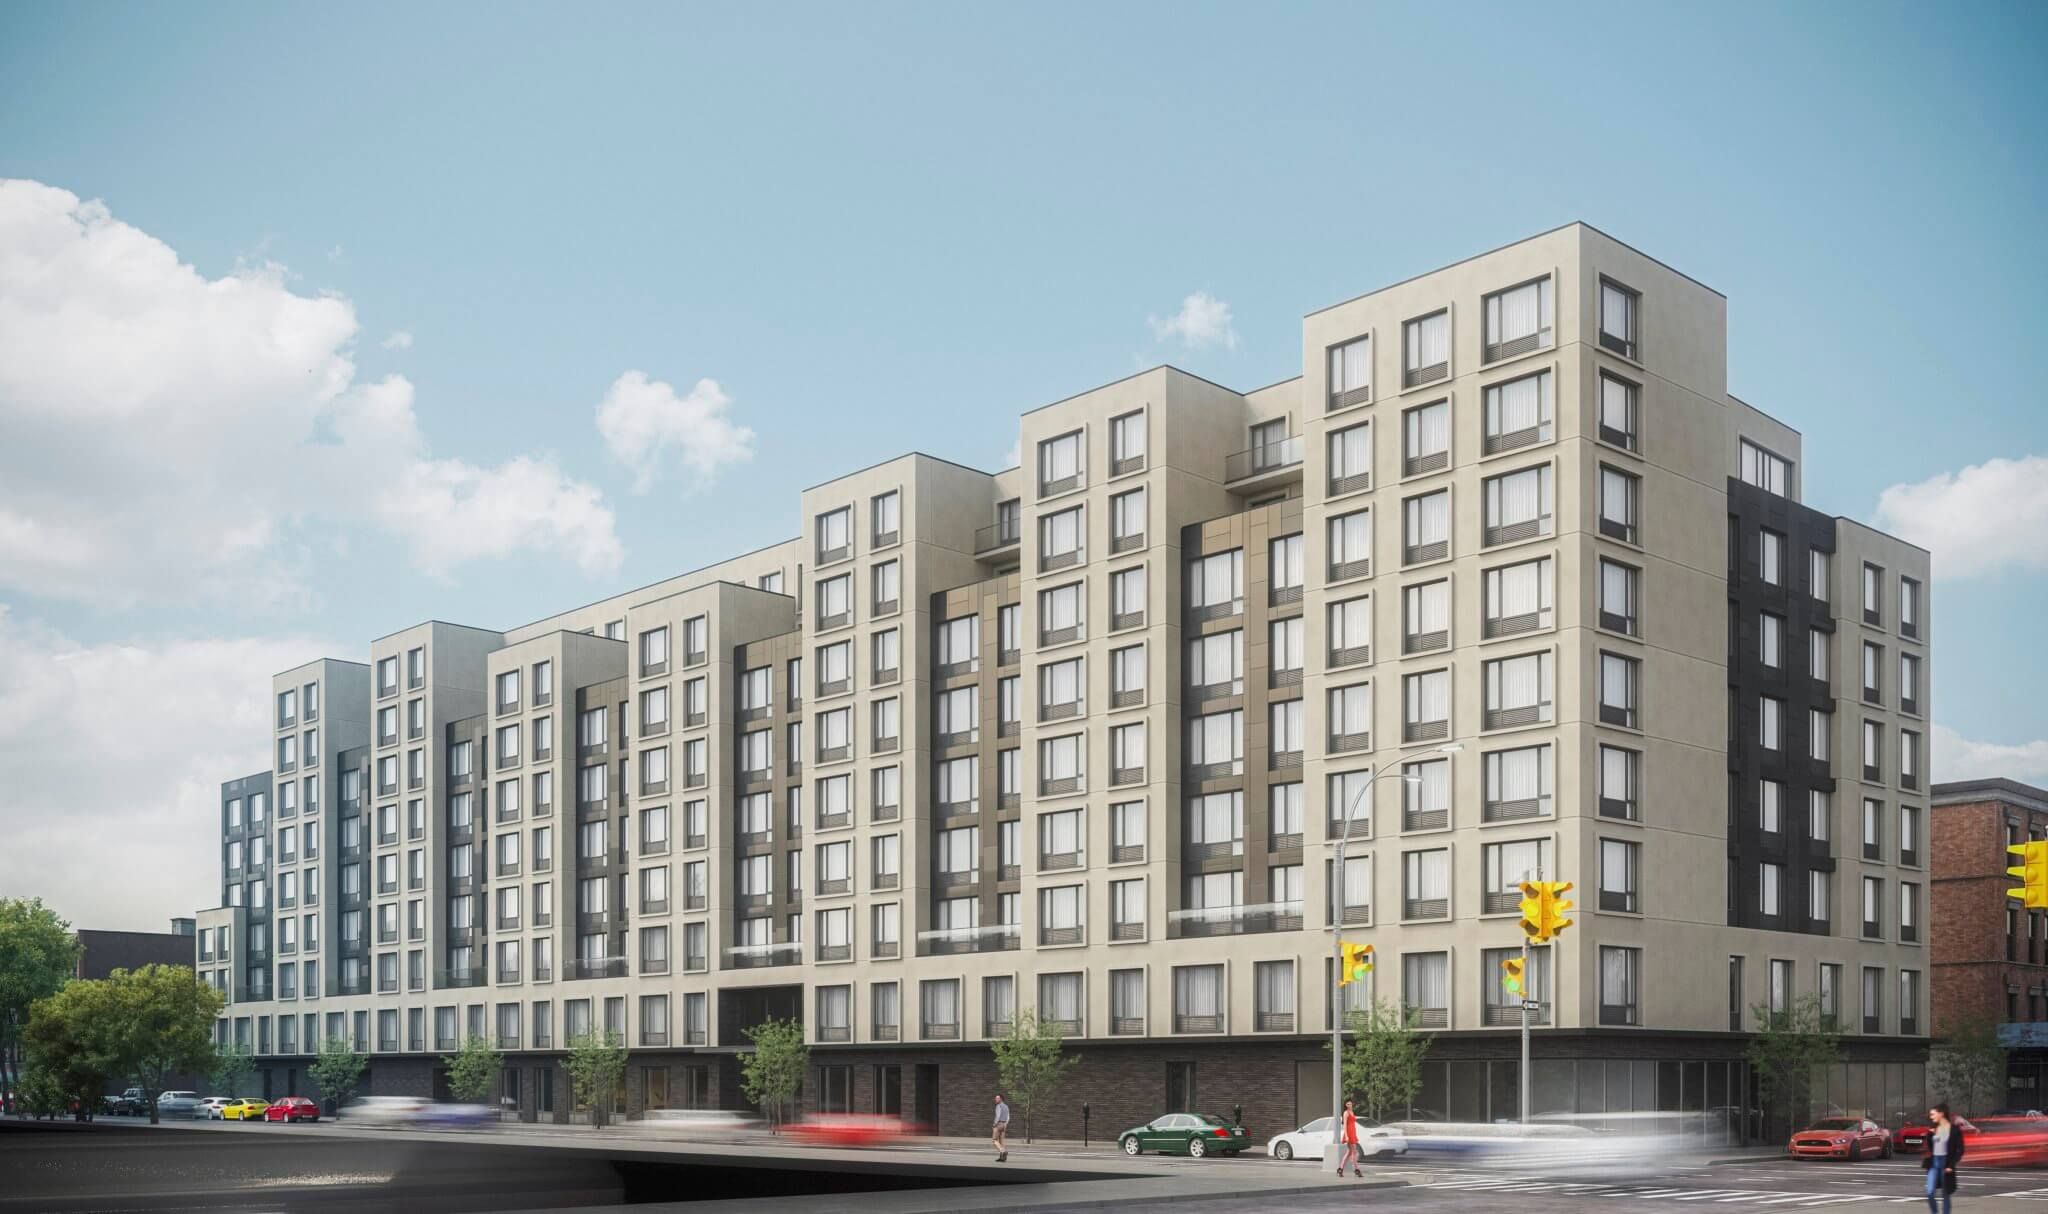 First rendering revealed for new housing development coming to the South Bronx